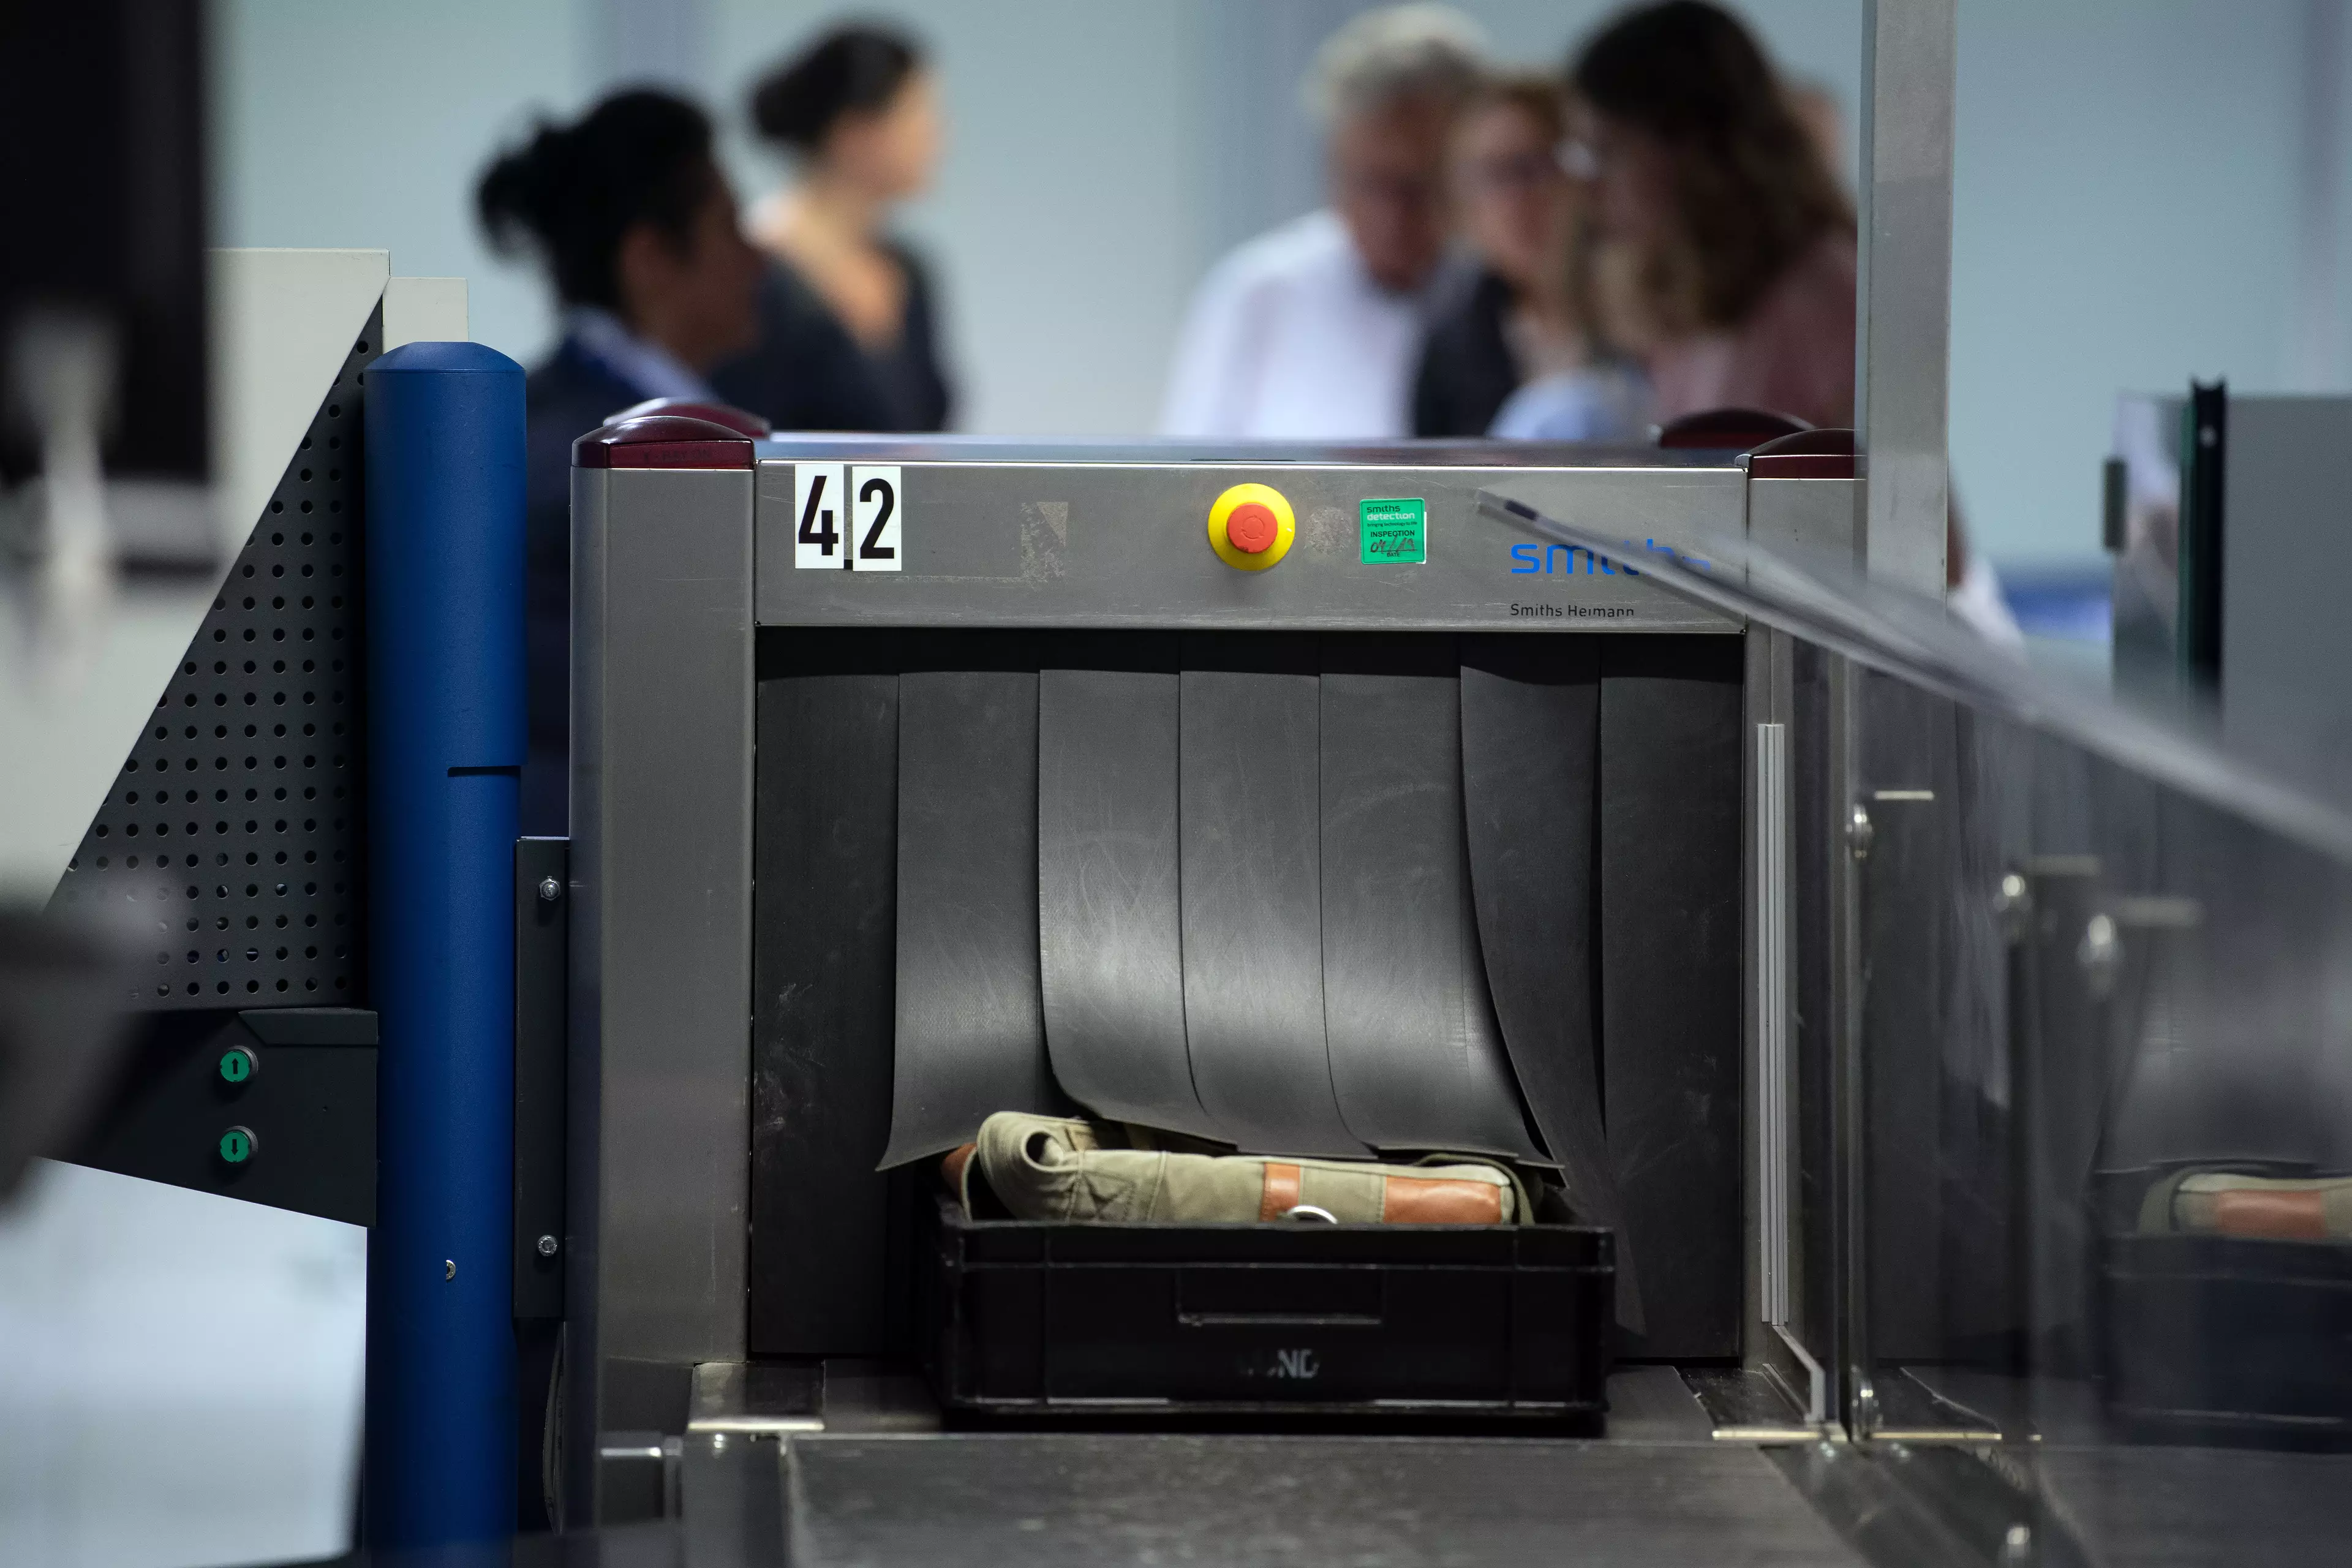 New security scanners will cut down the time spent at airports.